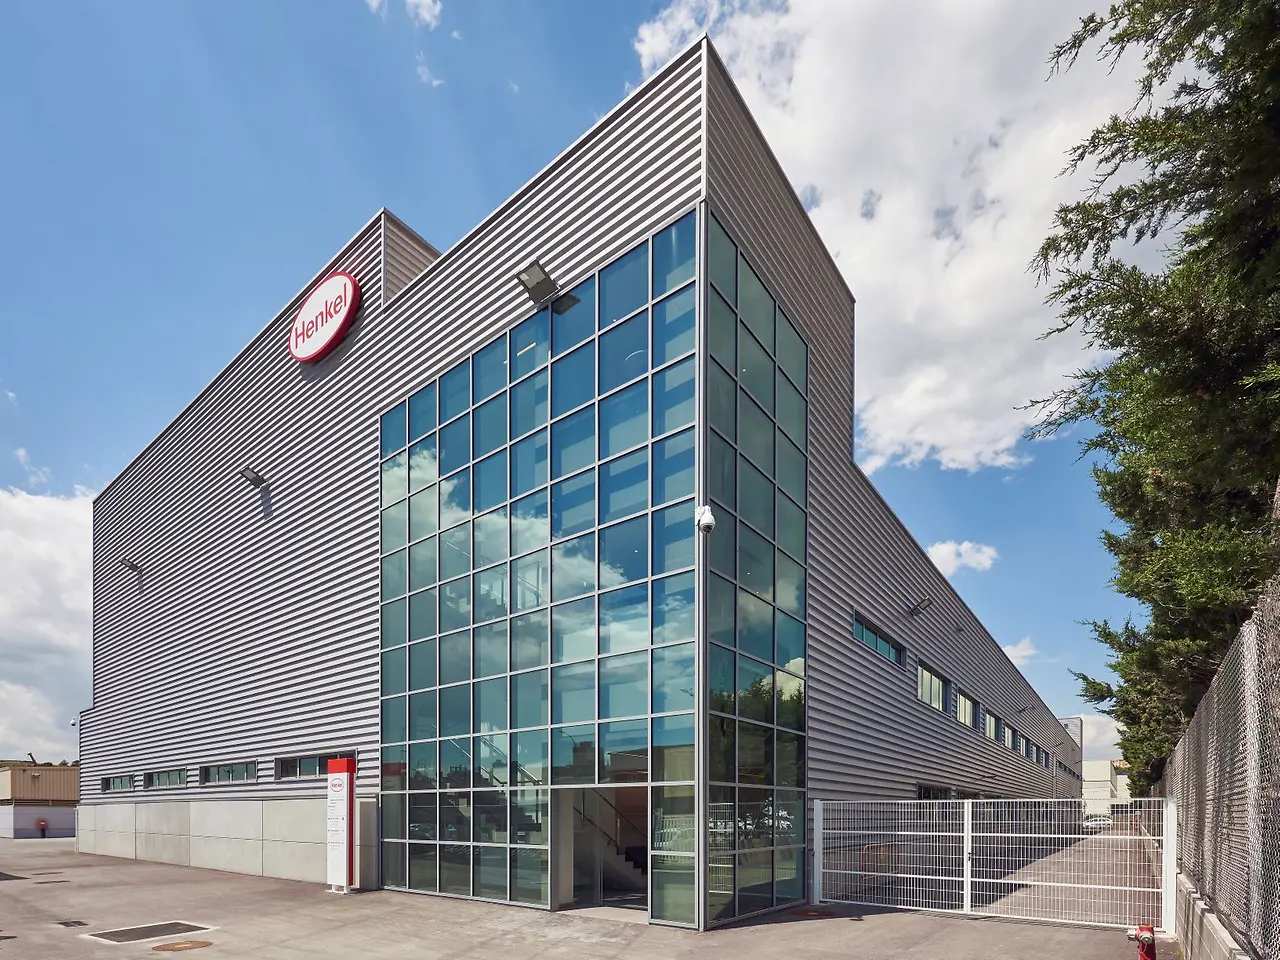 
Henkel Adhesive Technologies has significantly expanded its production capacities in Montornès del Vallès, Spain.